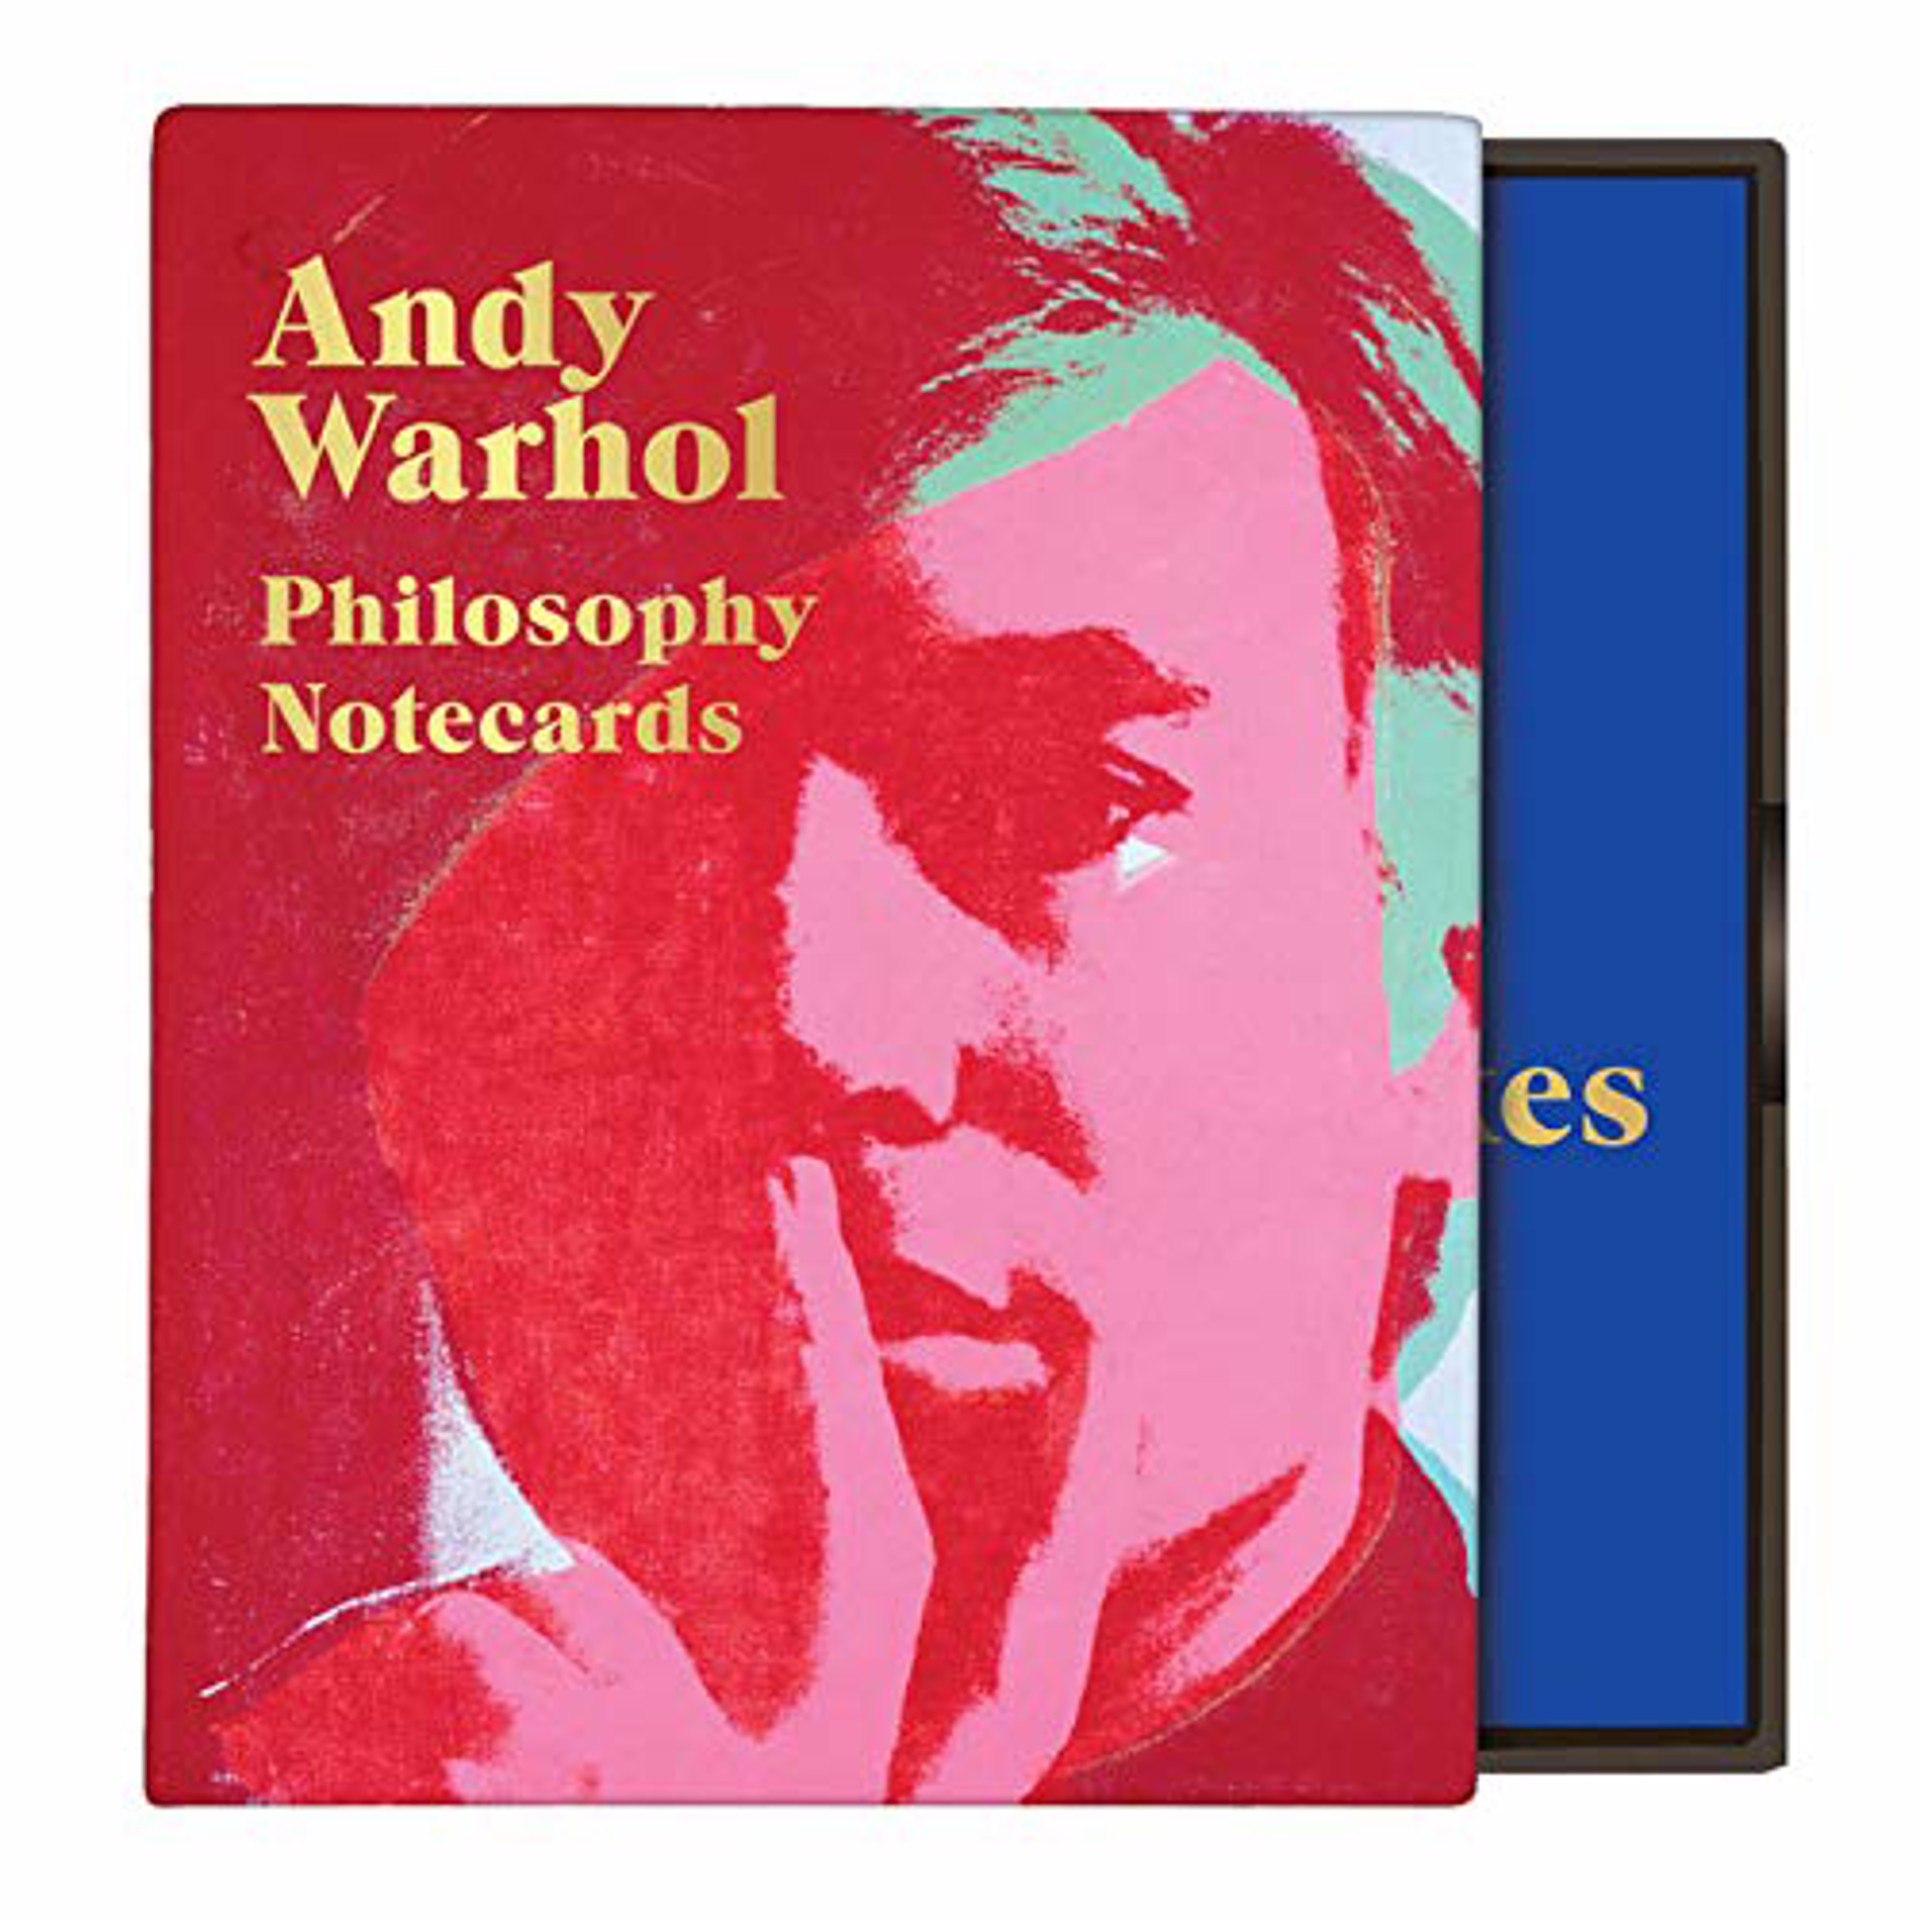 Philosophy Notecards by Andy Warhol